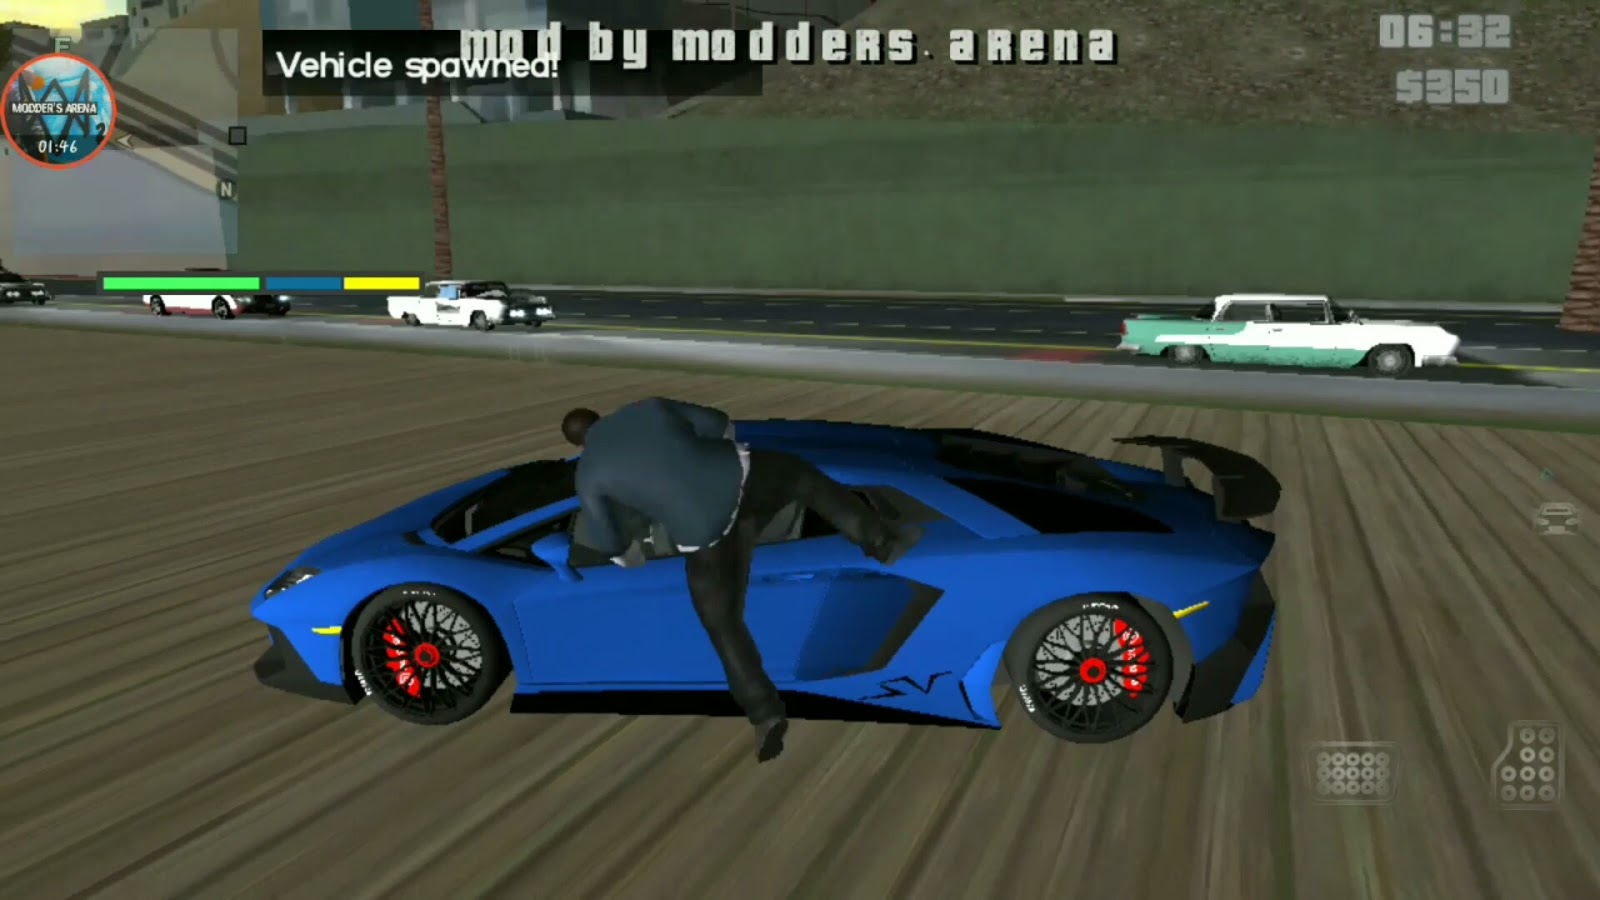 Download File Game Ppsspp Gta San Andreas For Android